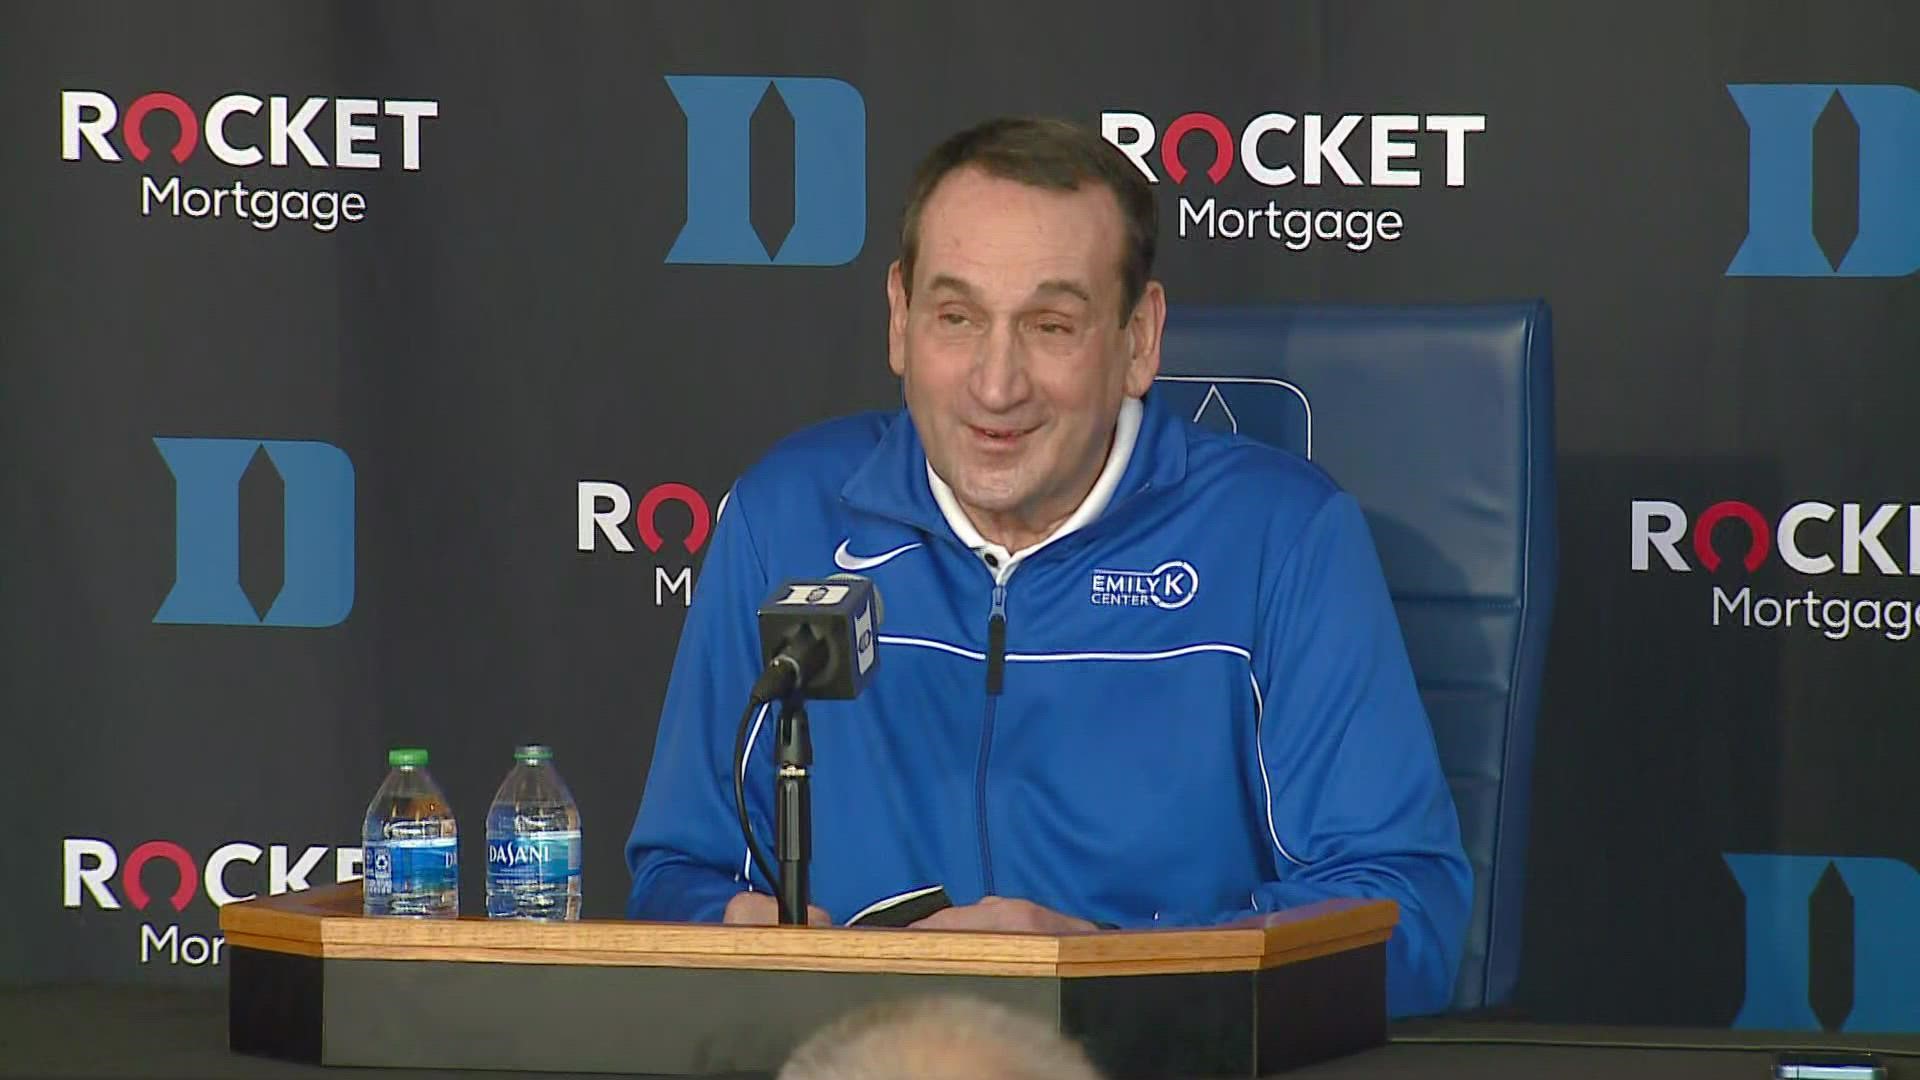 Coach K said at a news conference, it's hard to believe his final game at Cameron Indoor Stadium has arrived.